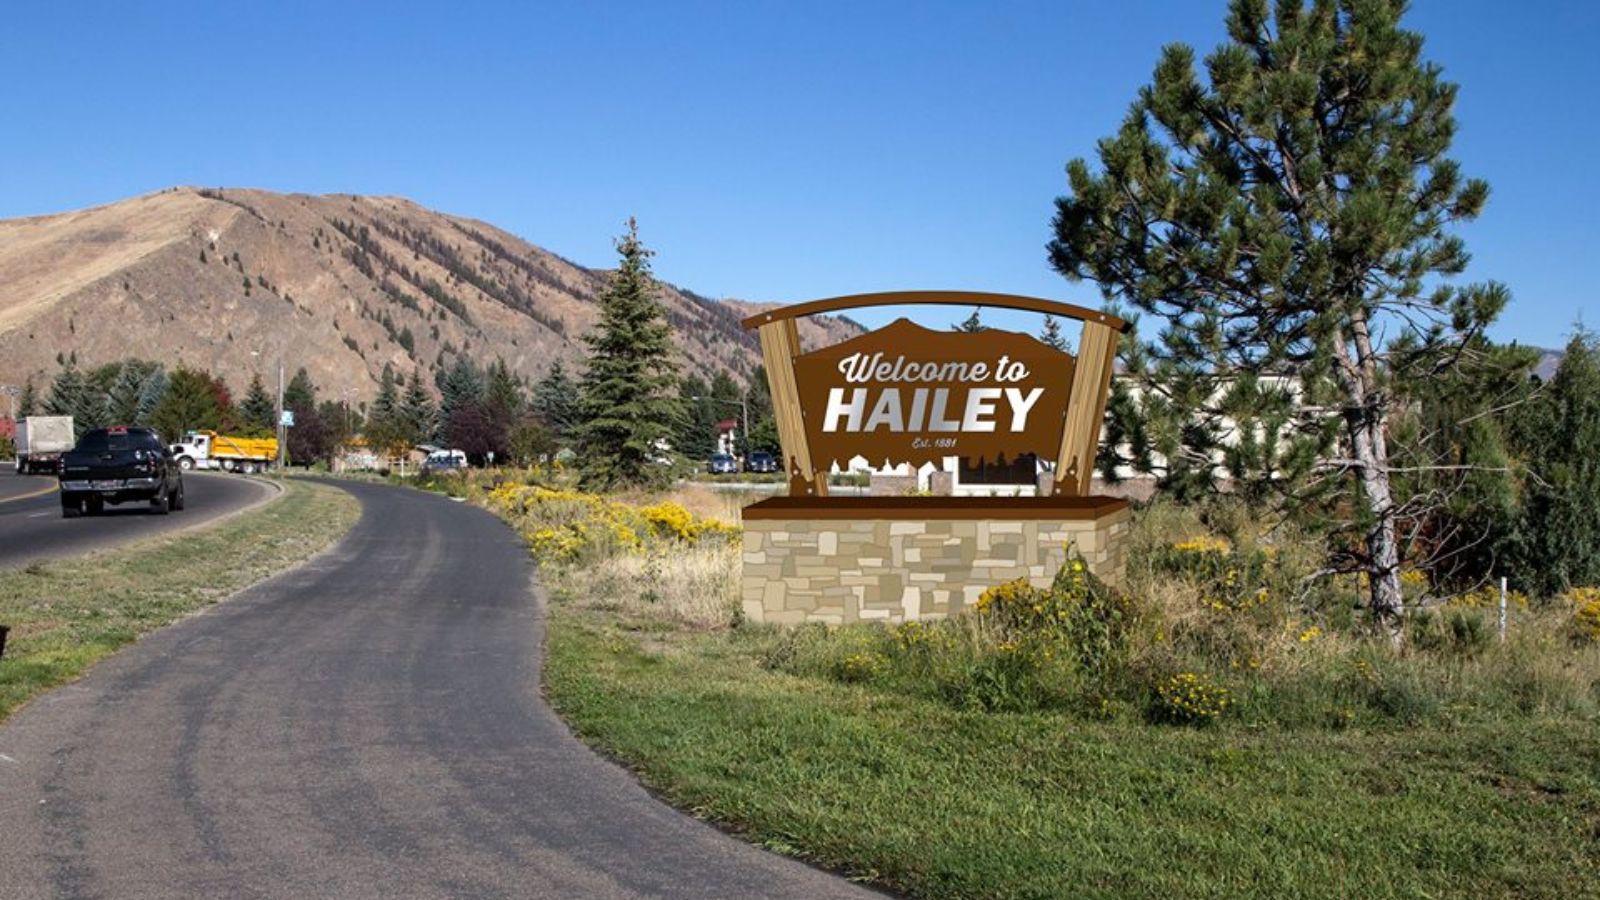 "Welcome" sign in Hailey, Idaho. Fly Private Jet.